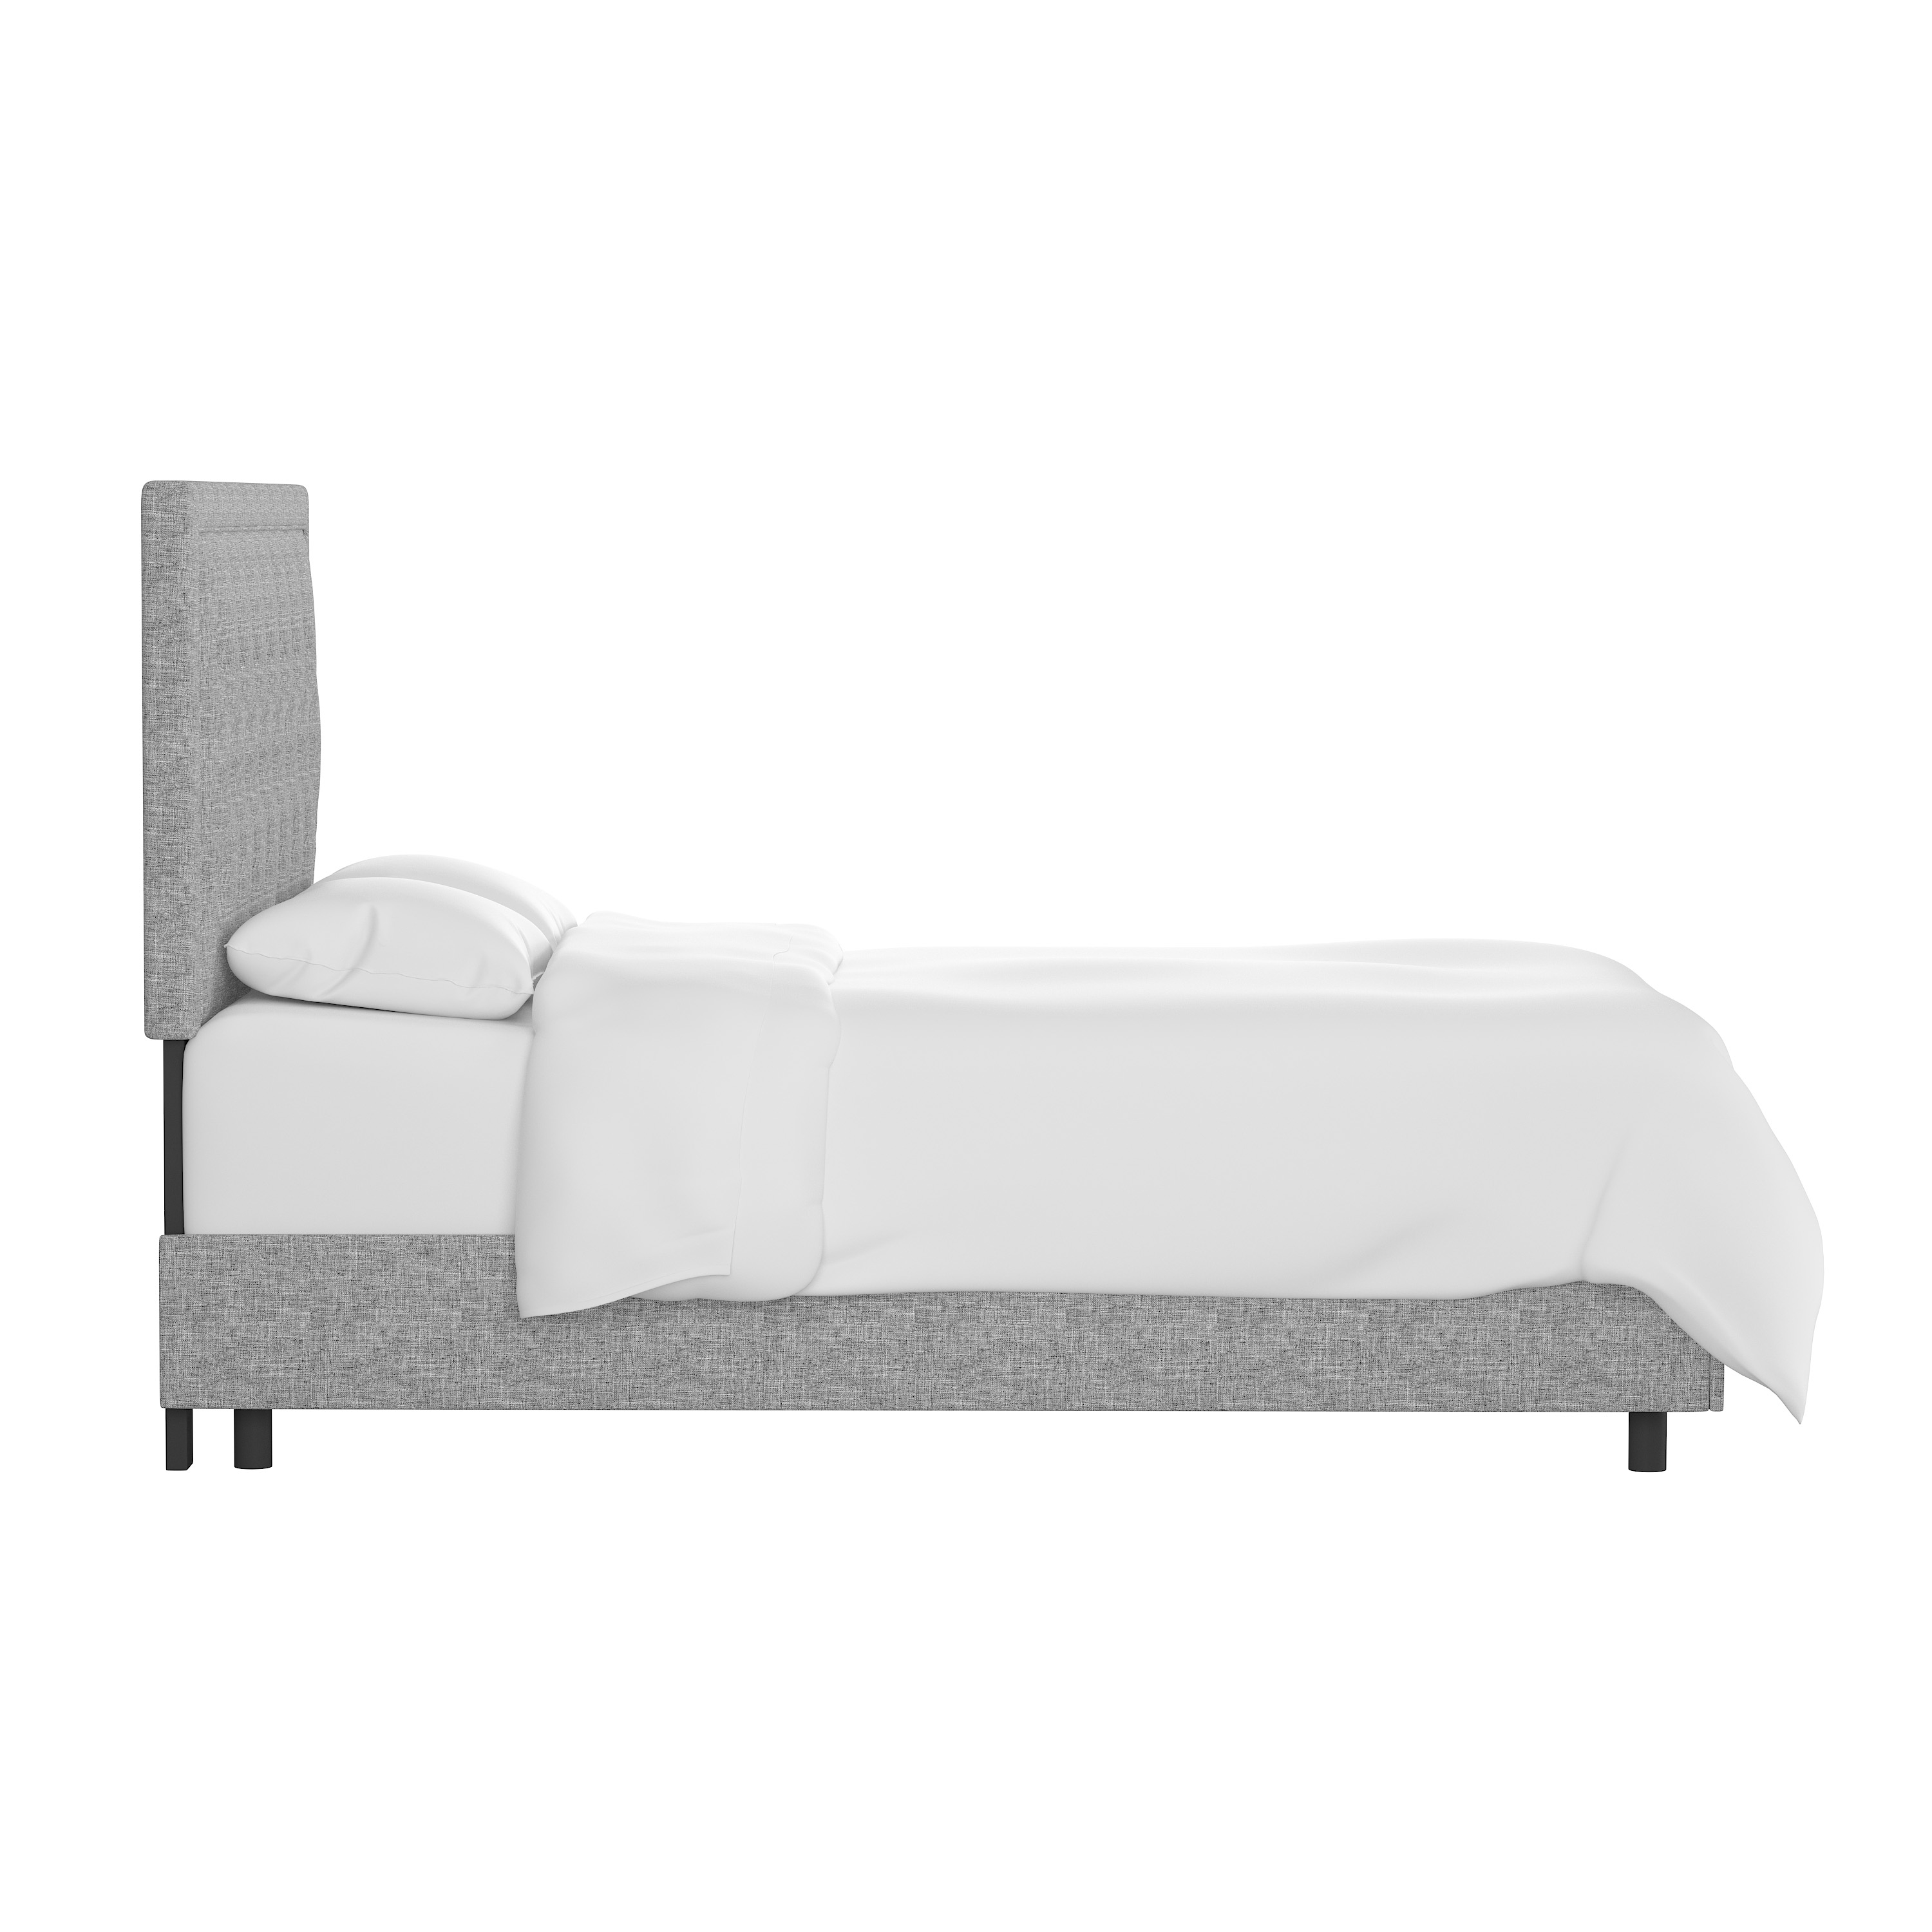 Lafayette Bed, King, Pumice - Image 2